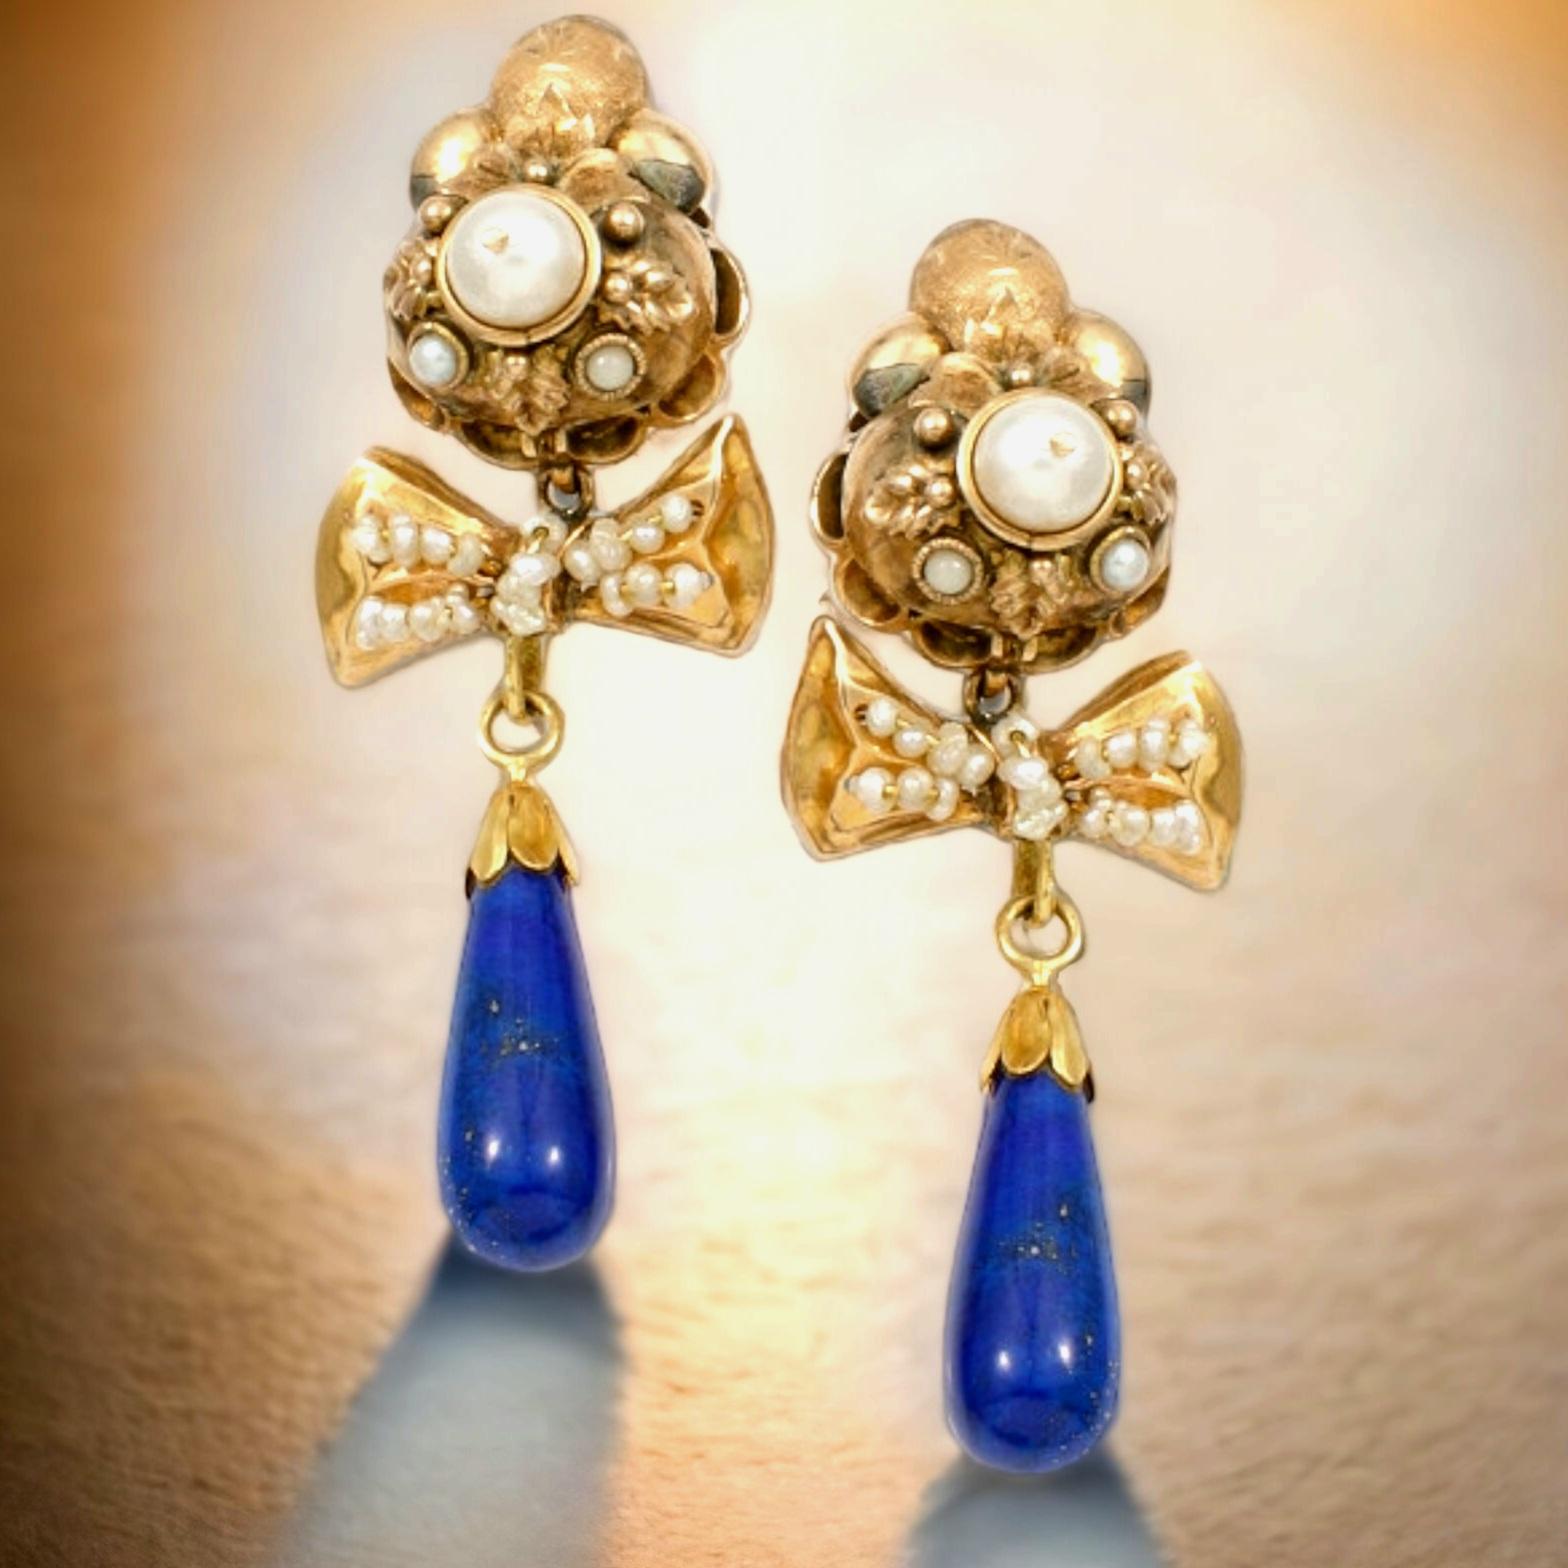 Antique Natural  Lapis Lazuli &  Pearl and Seed Pearl and Gold Pendant Bow Earrings. Early 19th Century.
Each earring is separated into three sections, each designed to move separately, so that the  long drop deep blue  purple lapis lazuli and all